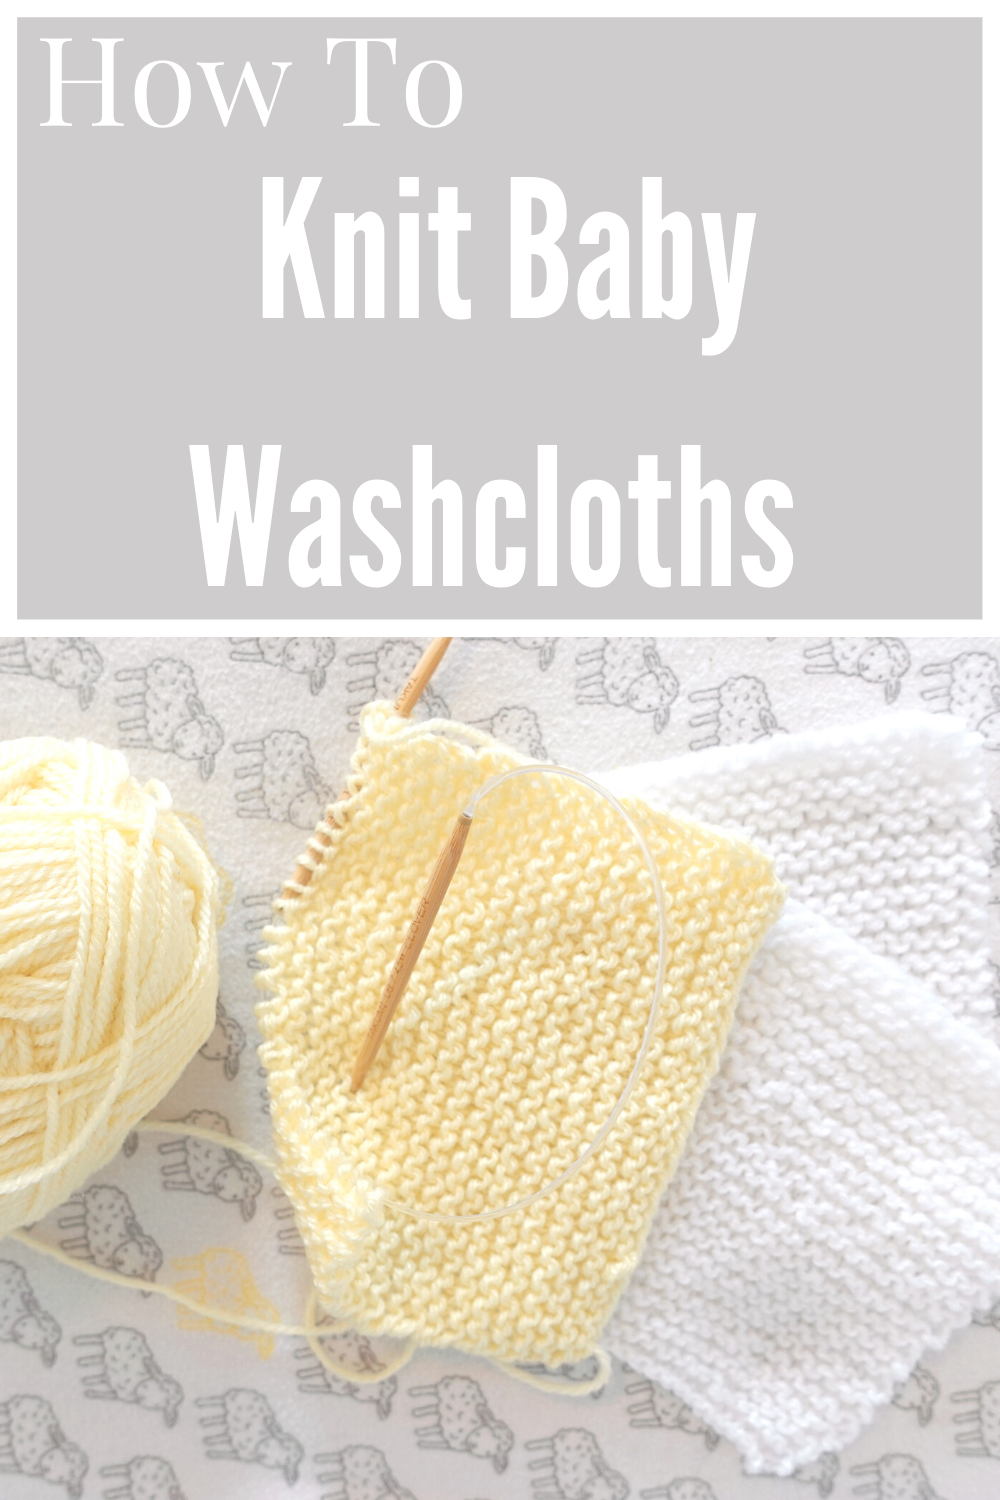 How to Knit Baby Washcloths Pinterest Pin 